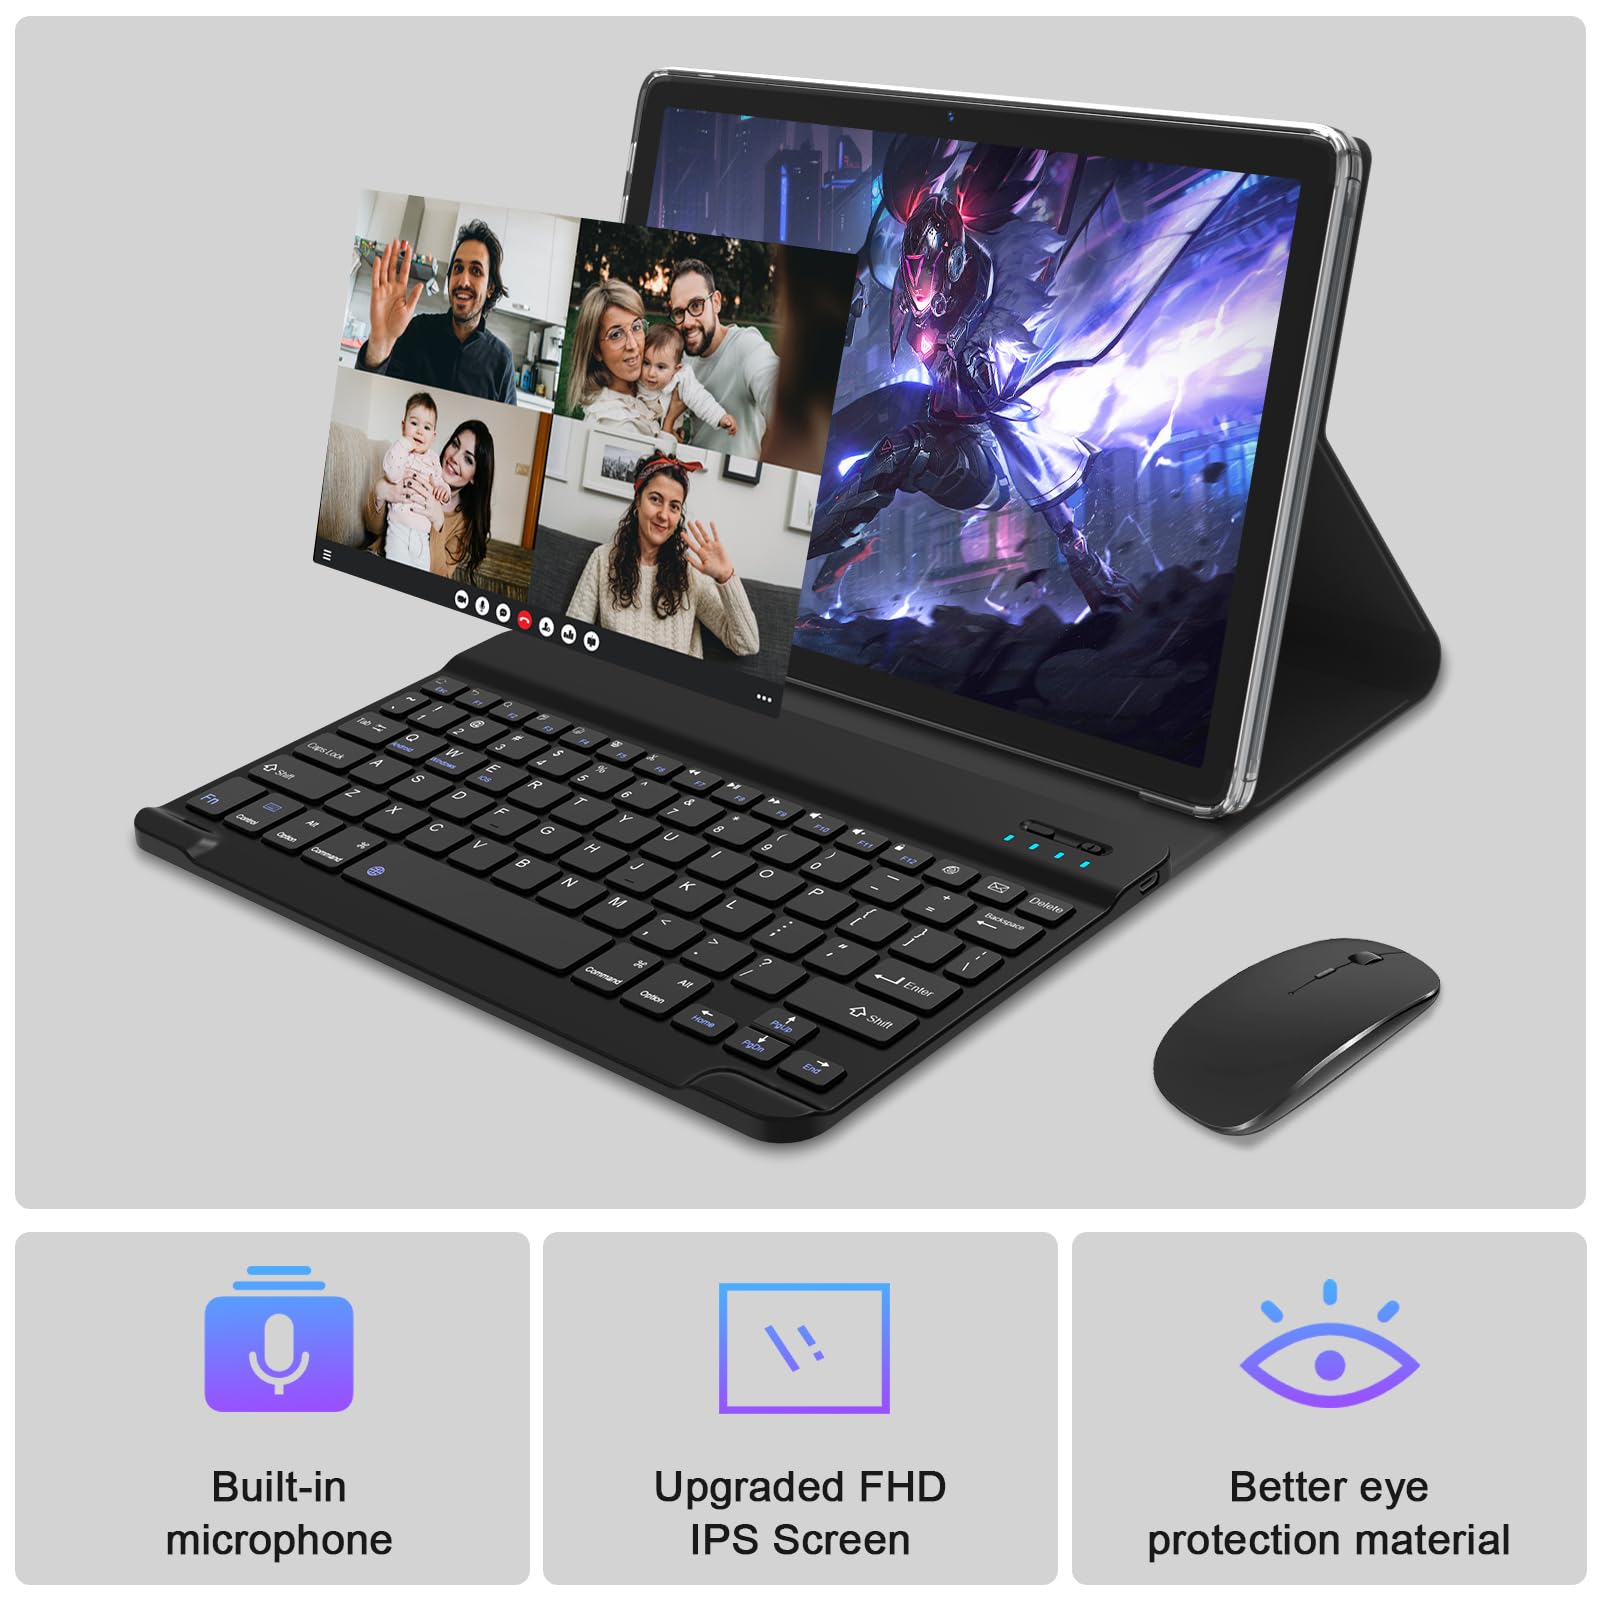 Tablet 10.1 Inch Android 12 Tablets 2023 Latest Android Tablet 128GB ROM+16GB RAM (8+8 Virtual), 2 in 1 Tablet with Keyboard, Powerful Octa-Core+13MP Camera, 1TB TF Expandable, FHD WiFi Tablet PC